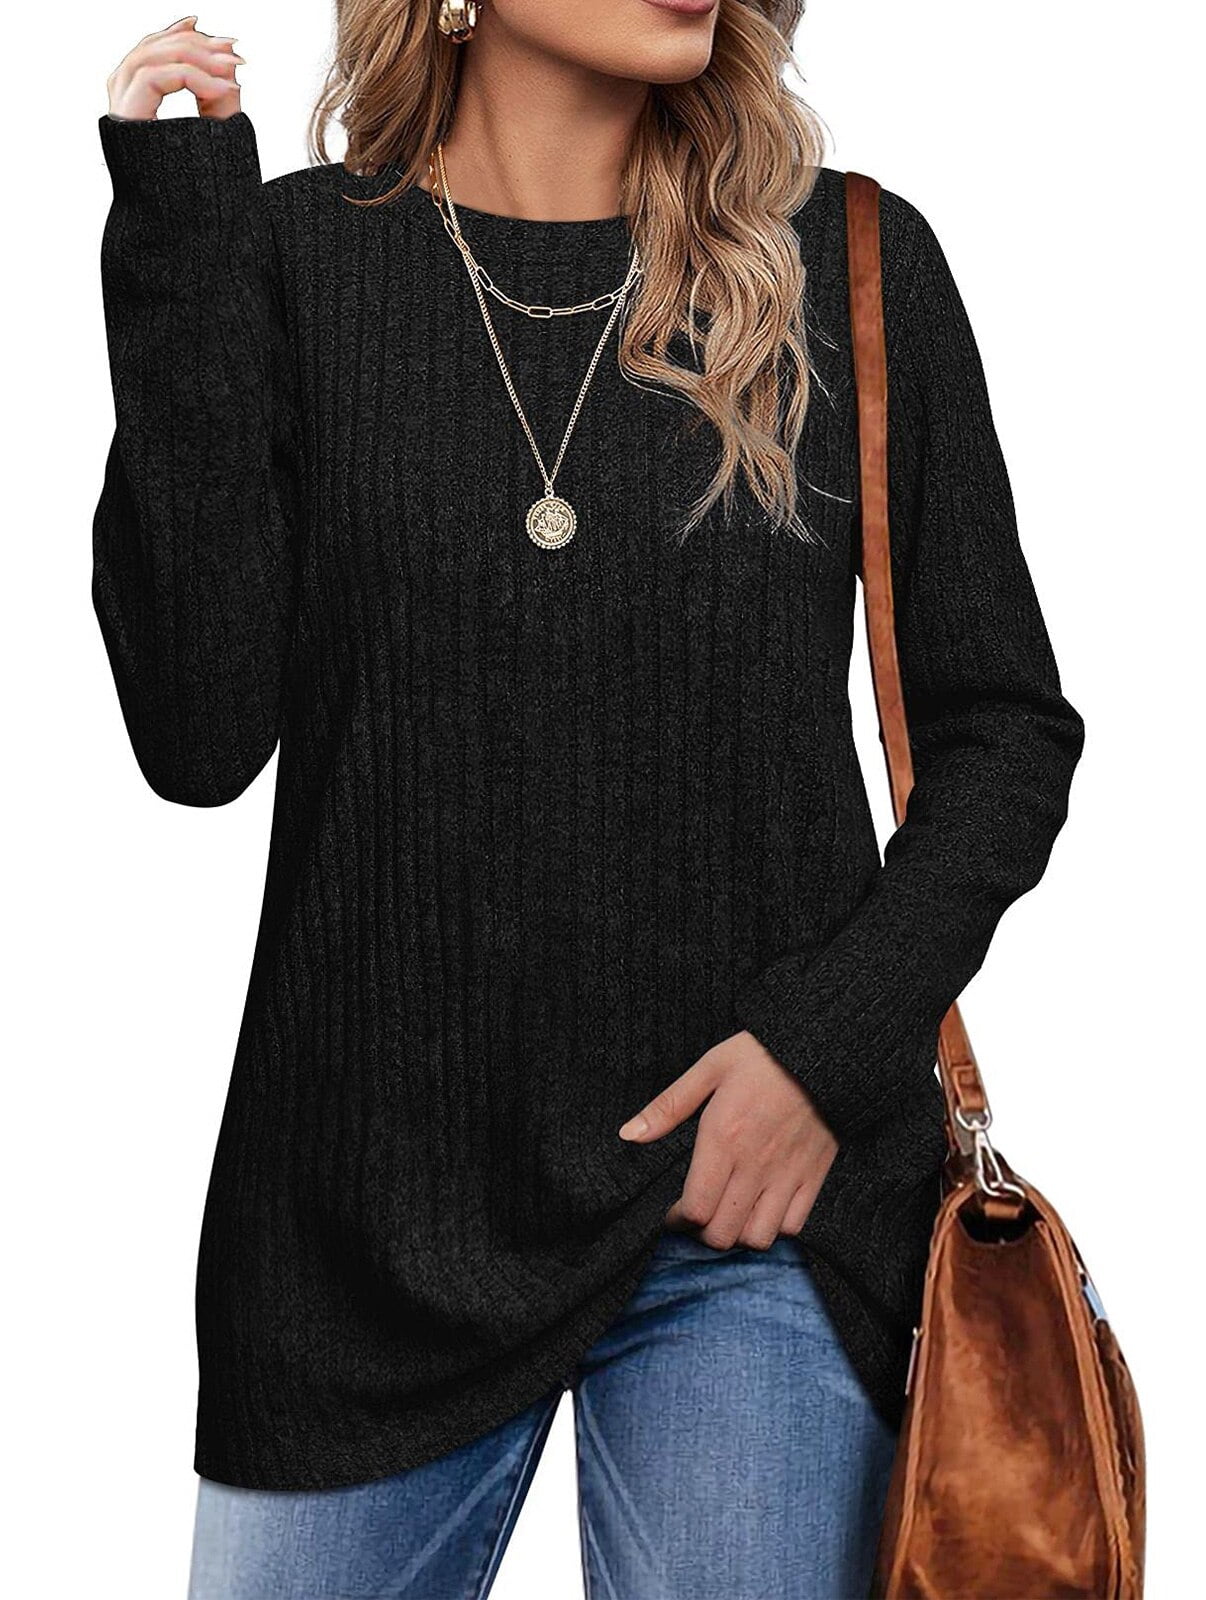 Fantaslook Long Sleeve Shirts for Women Crew Neck Casual Tunic Tops ...